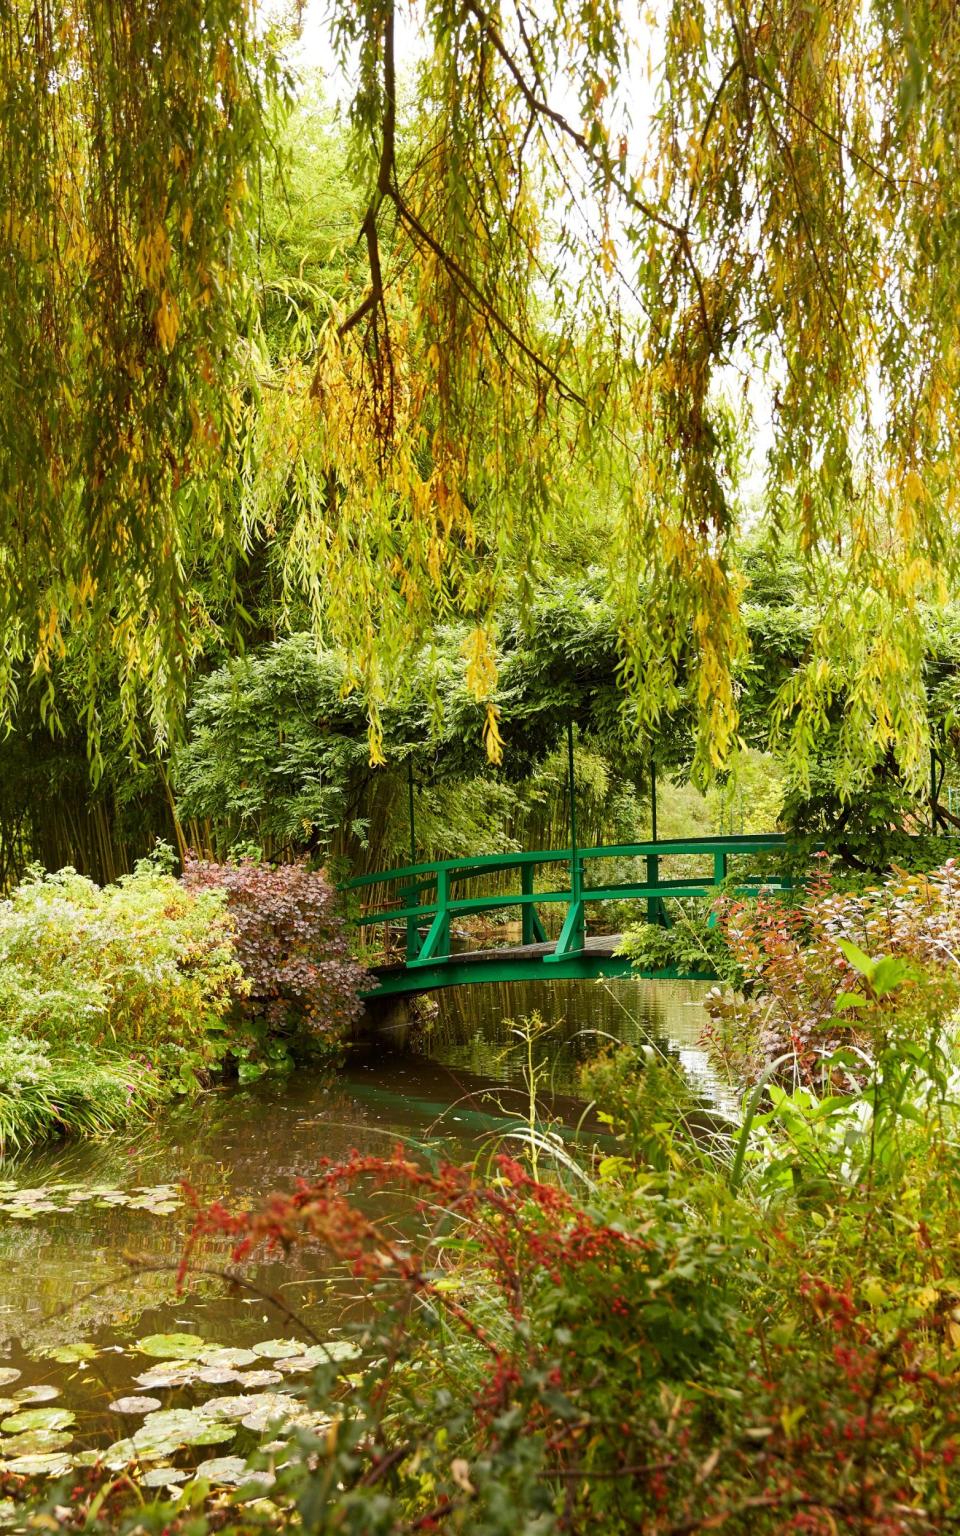 Monet spent about 35 years planting, replanting and felling trees in his garden at Giverny